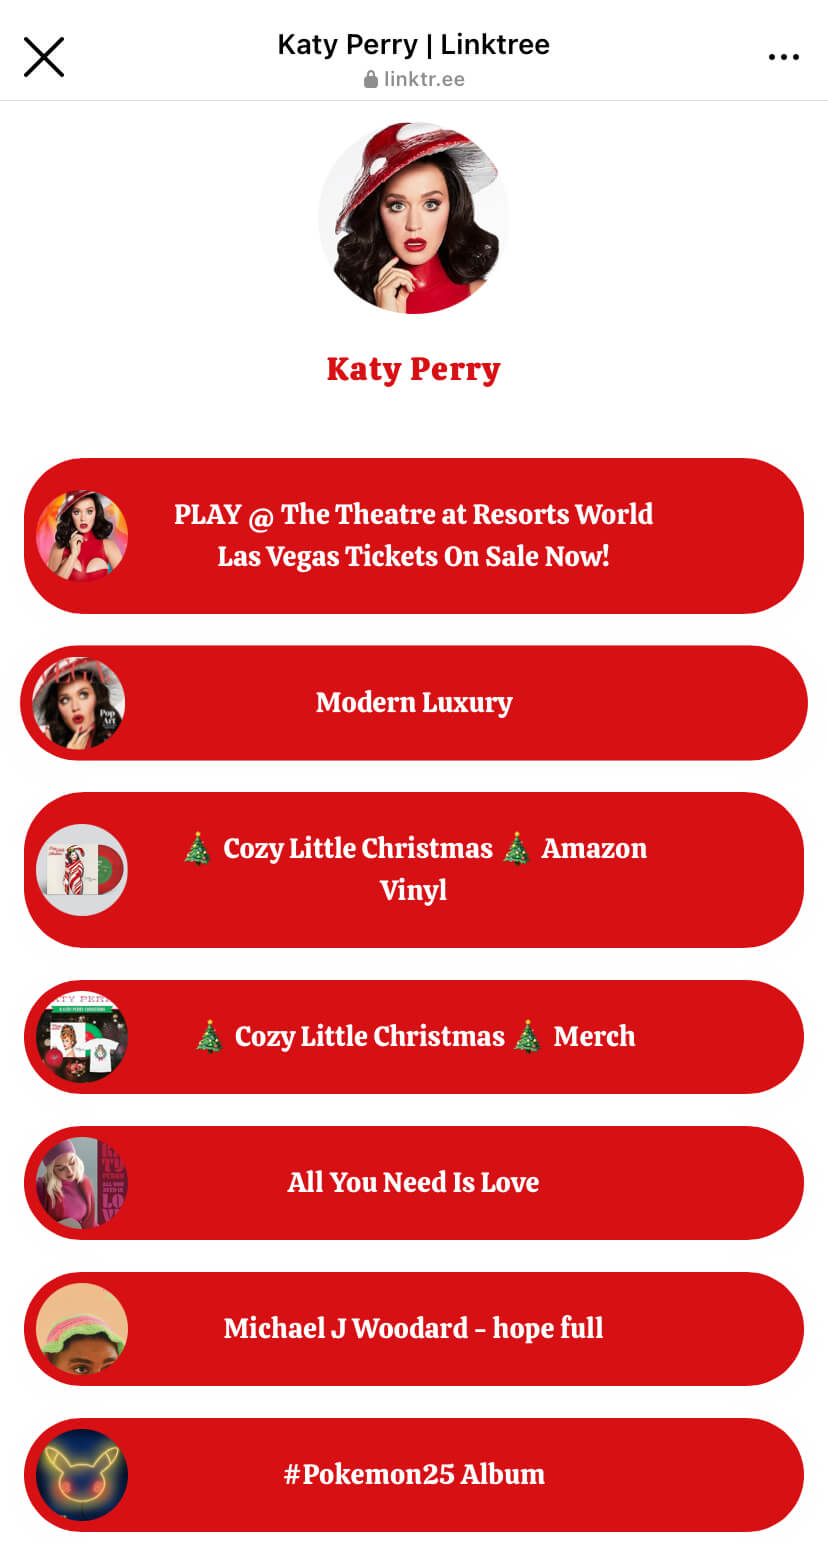 Katy Perry’s Linktree page with various links